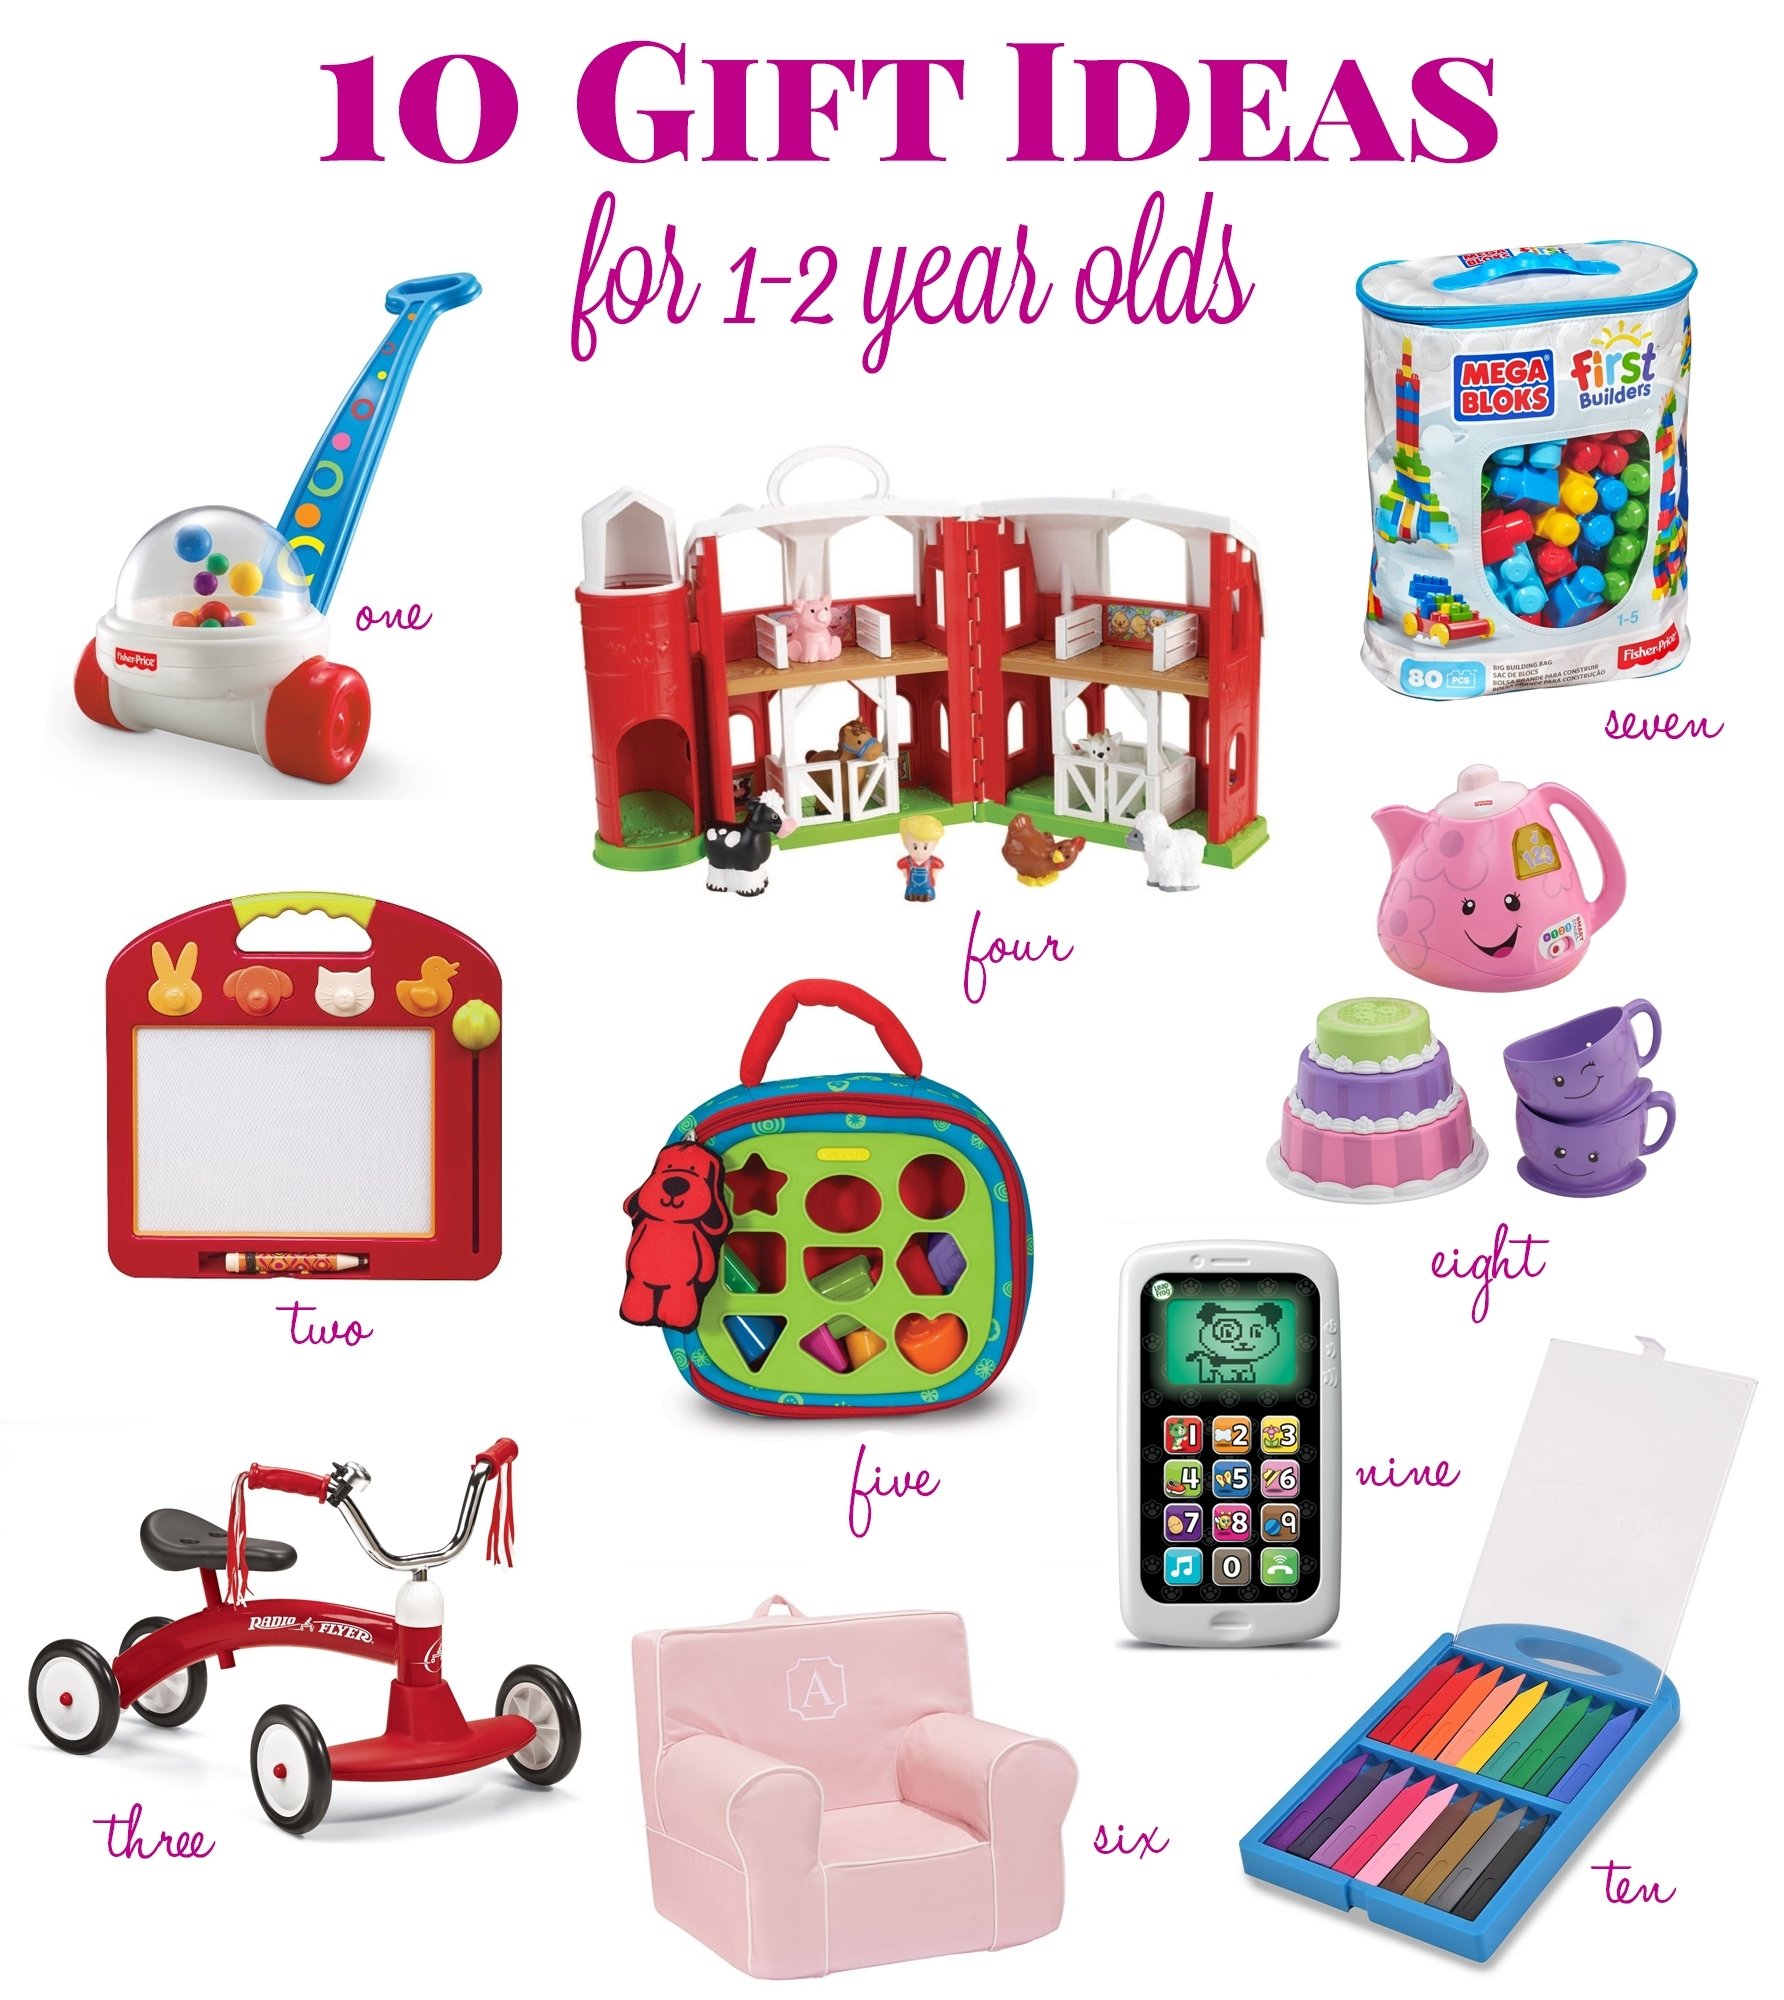 10 Lovely Gift Ideas For One Year Old gift ideas for a 1 year old lifes tidbits 4 2022